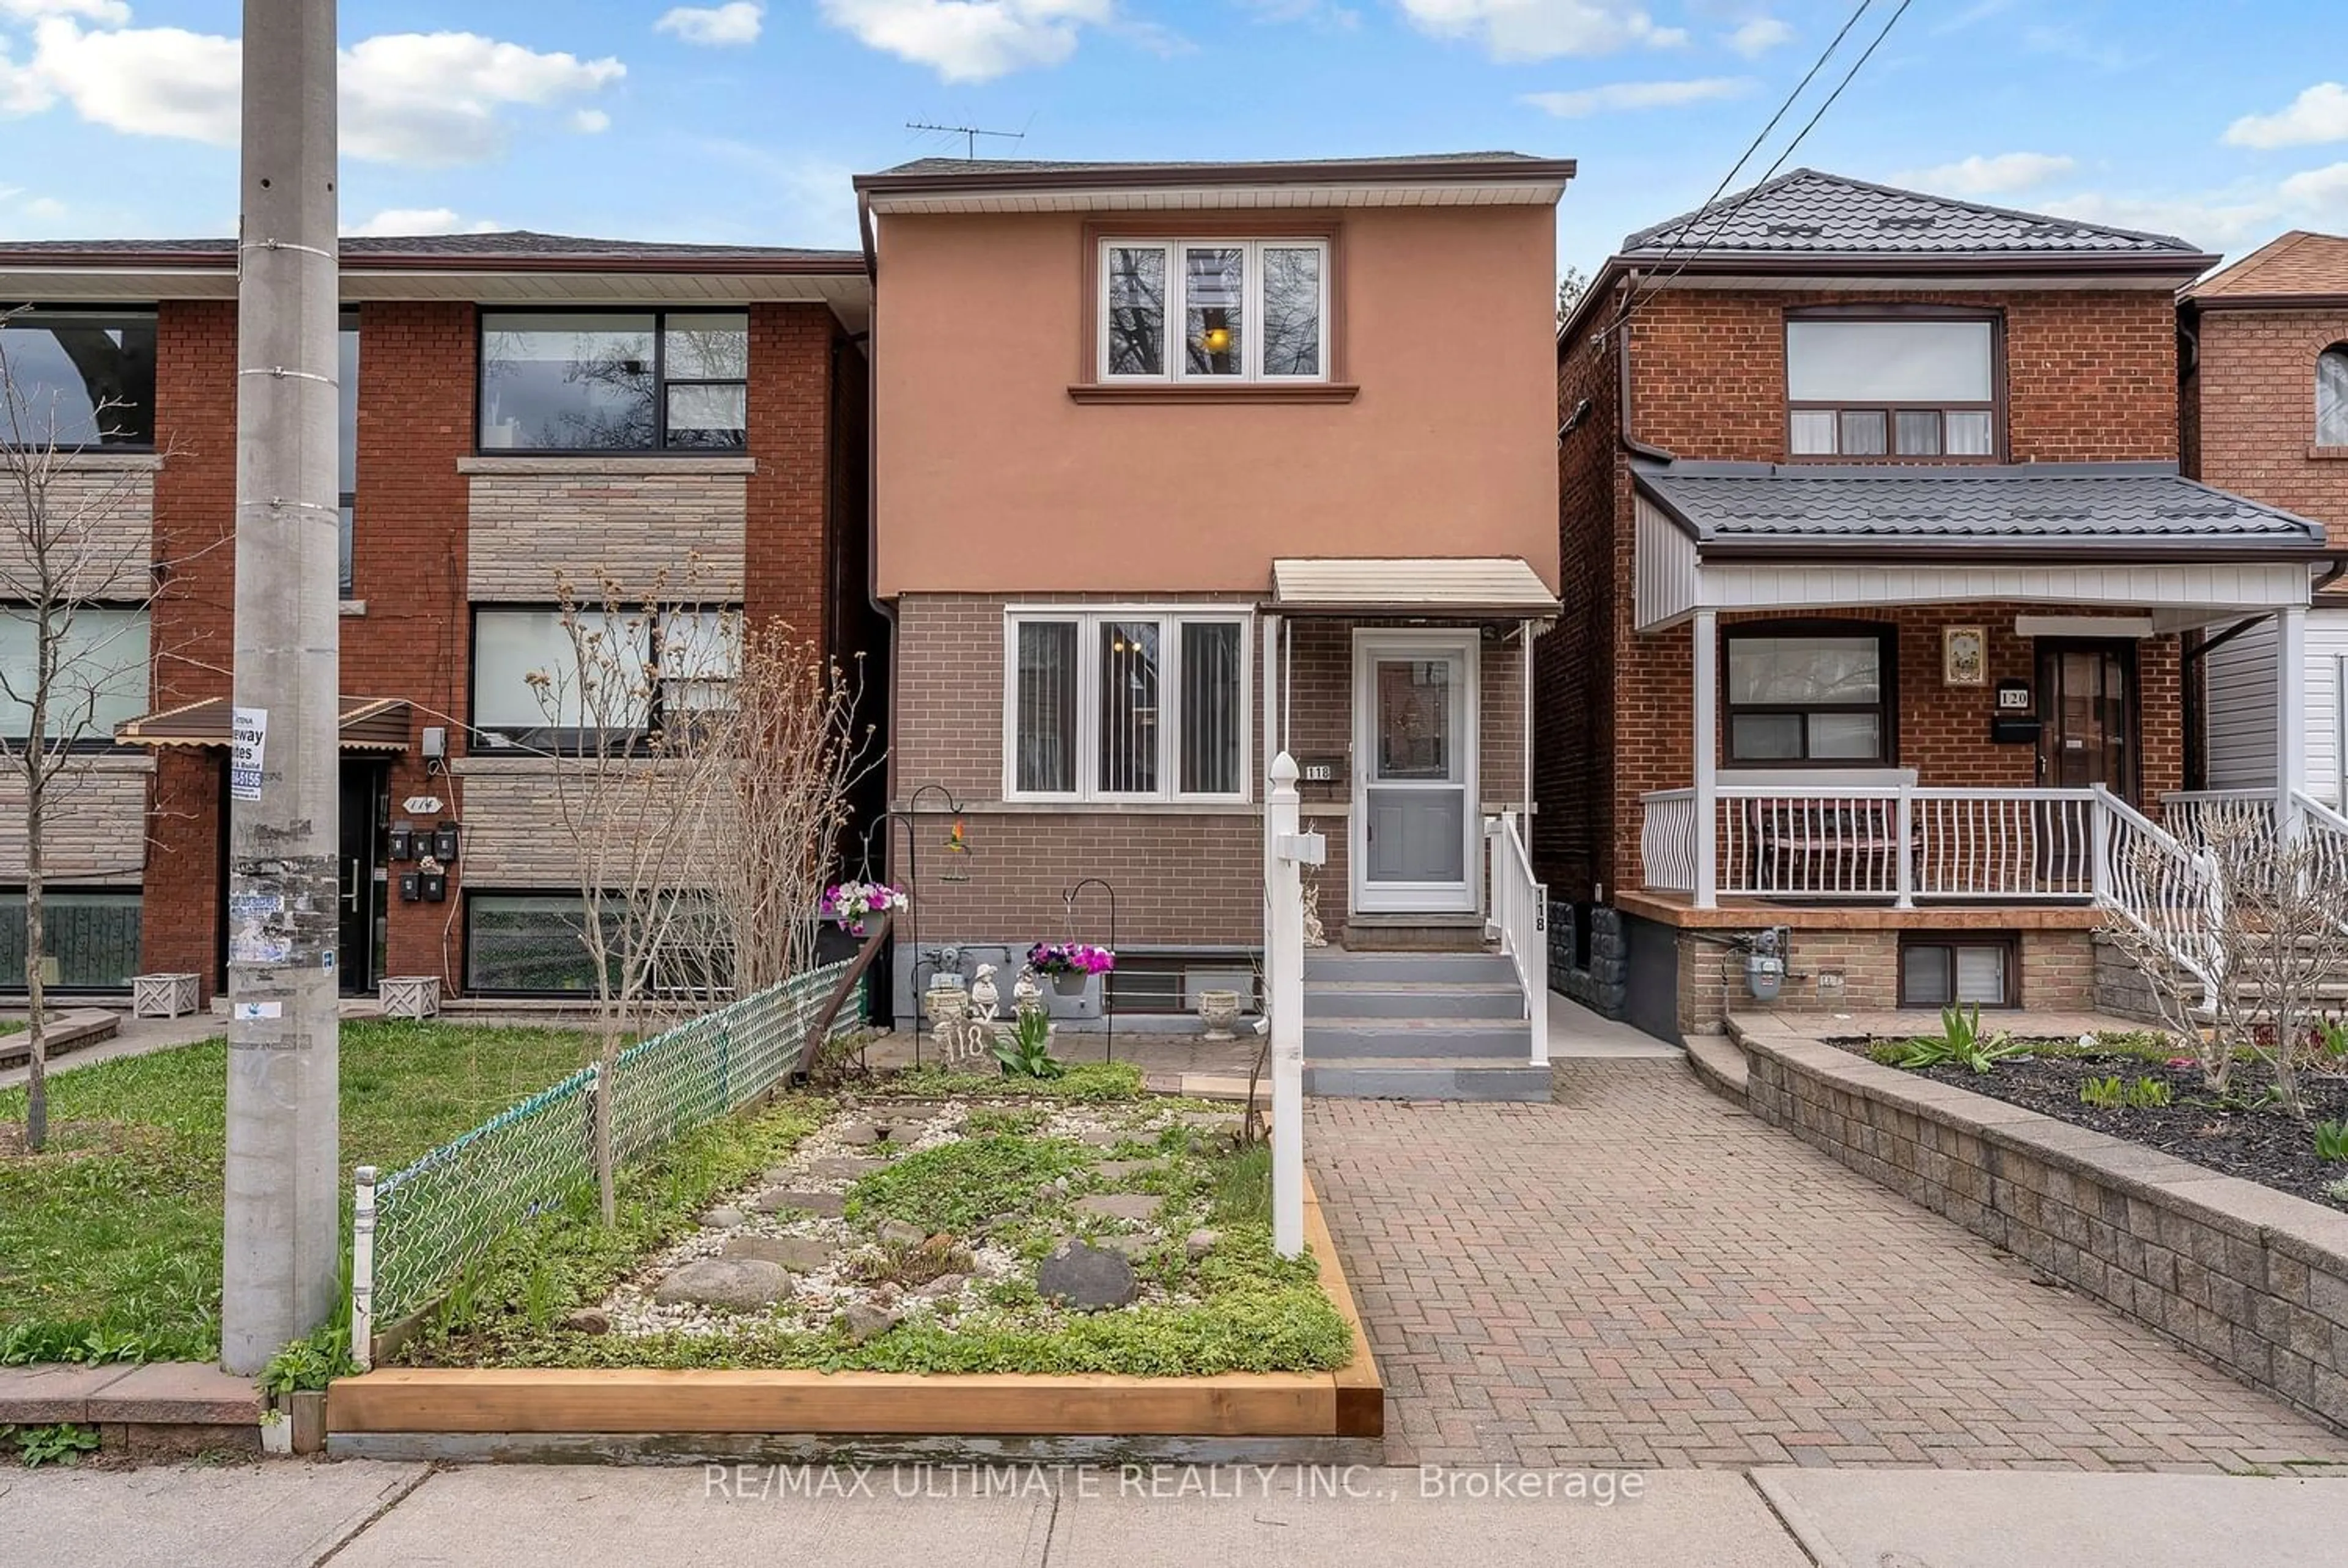 Home with brick exterior material for 118 Nairn Ave, Toronto Ontario M6E 4H1